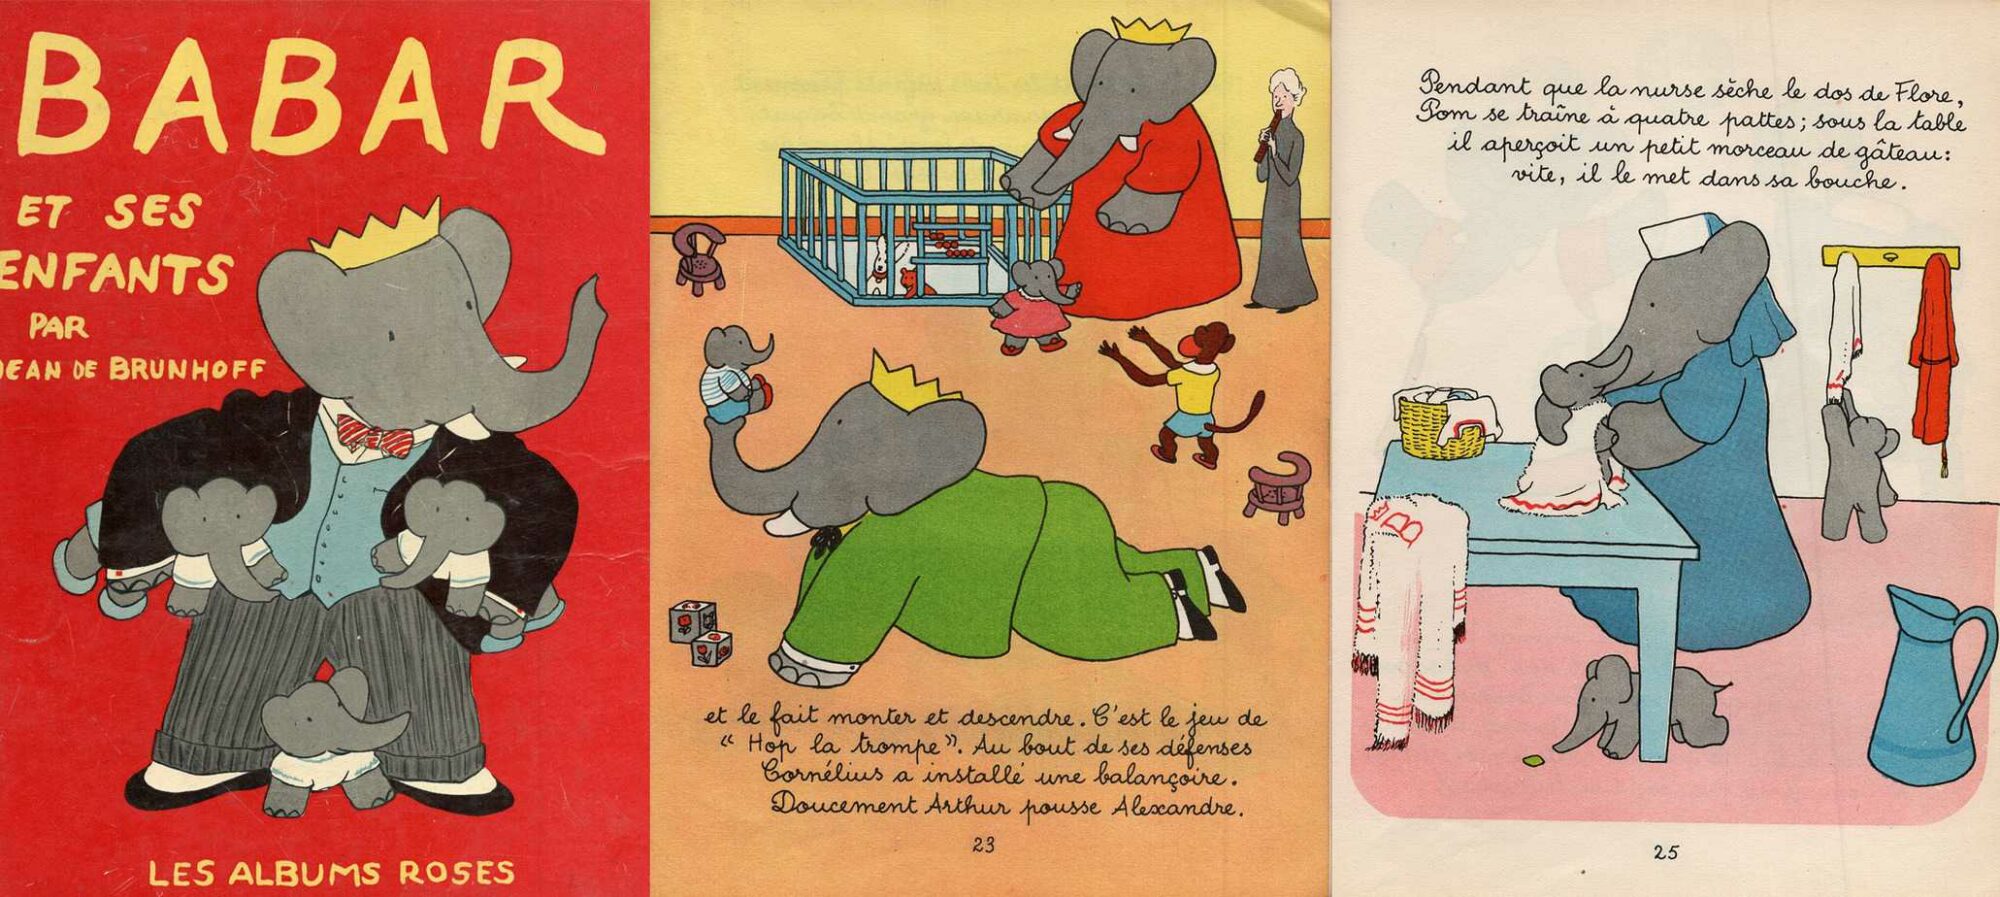 From Brunhoff, Jean, BABAR and his Children, 1953